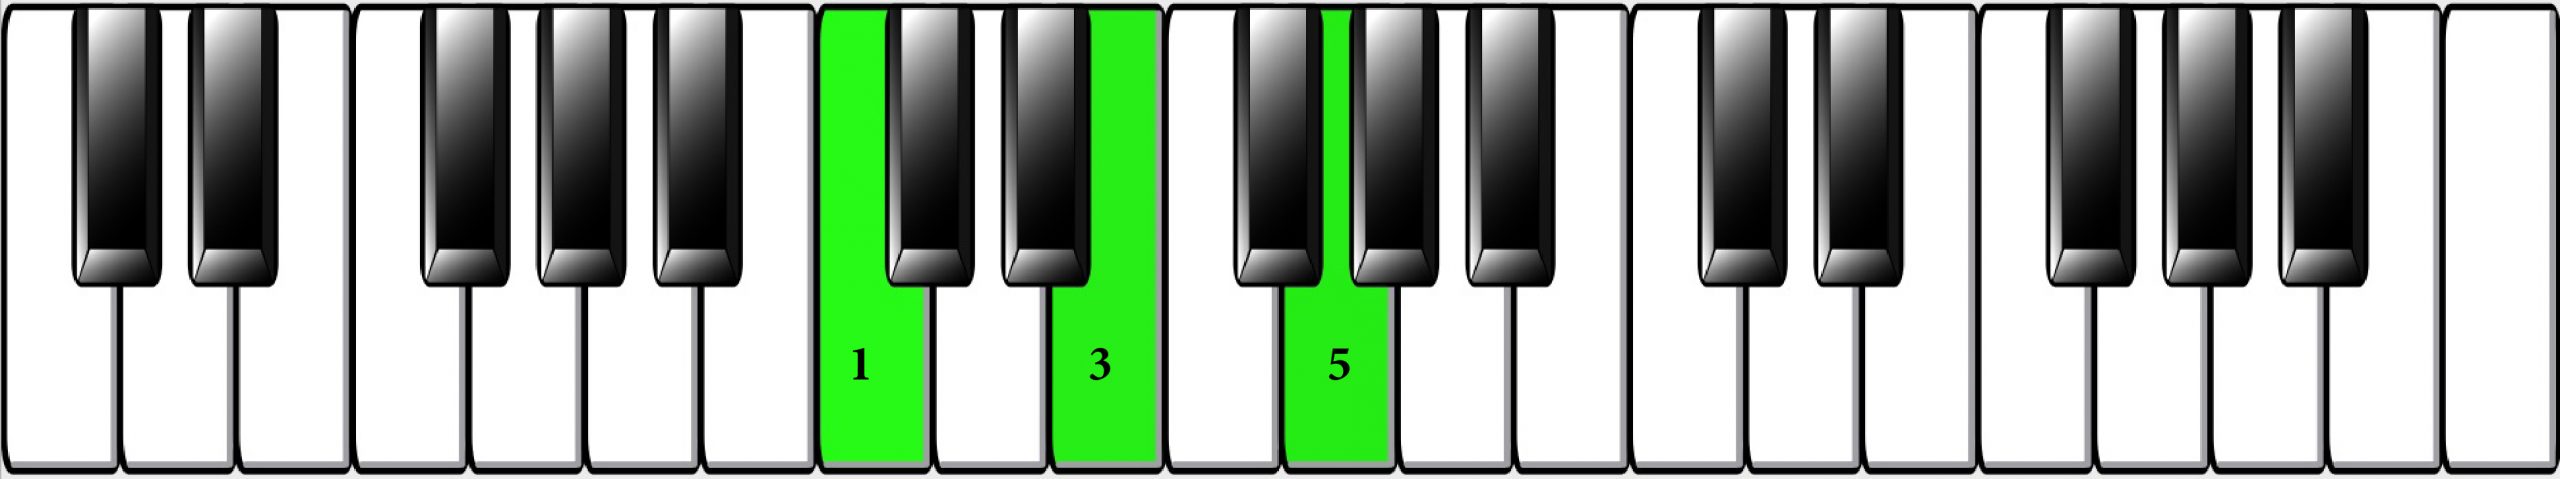 Keyboard graphic displaying finger placement.